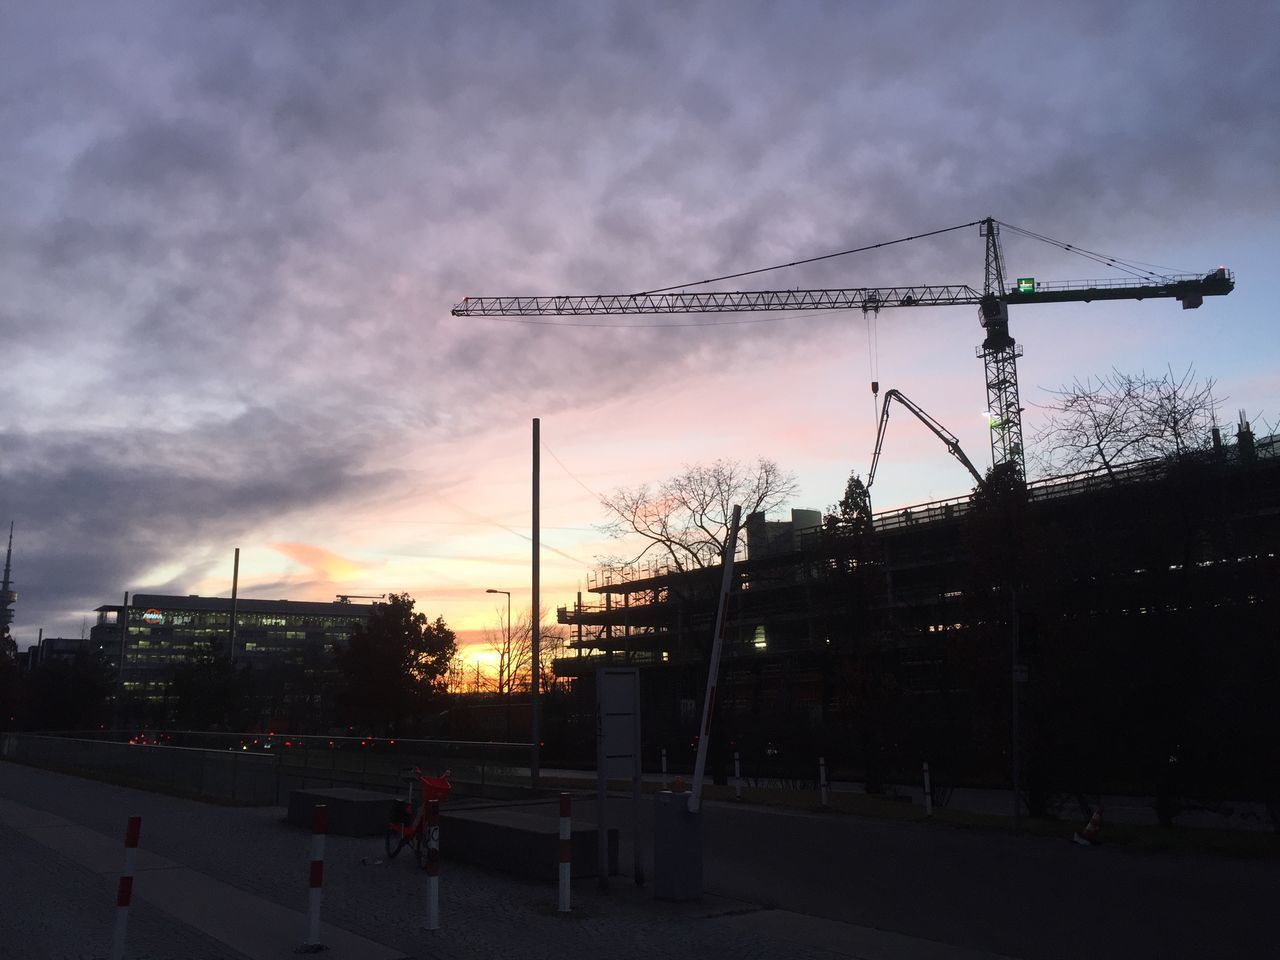 SILHOUETTE CRANES AT CONSTRUCTION SITE AGAINST SKY